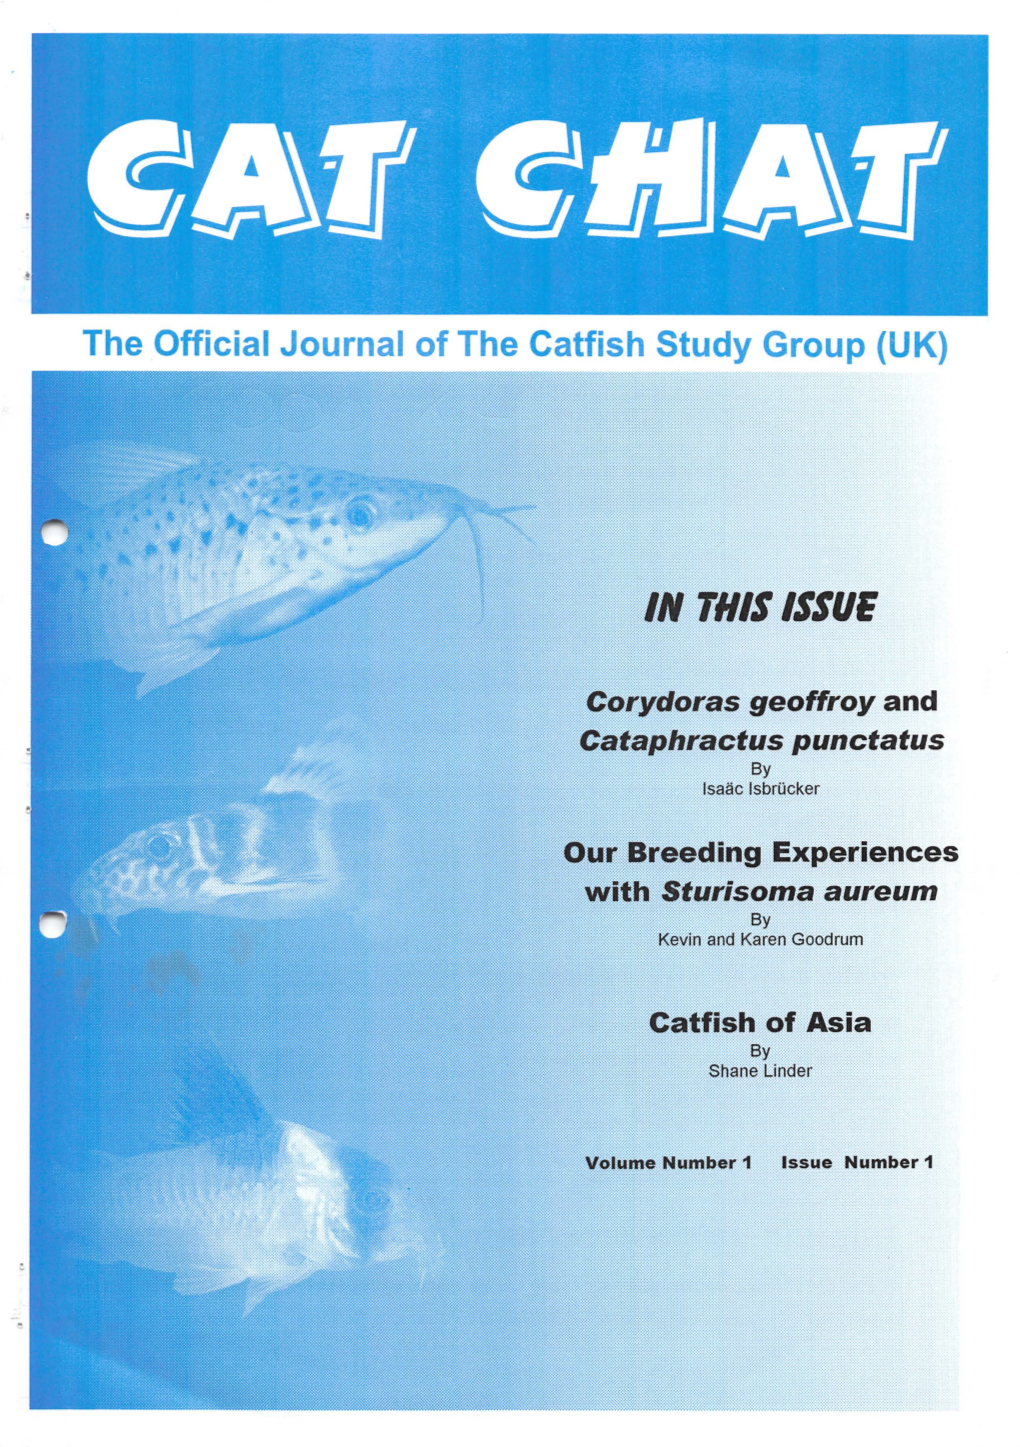 The Official Journal of the Catfish Study Group (UK) CONTENTS